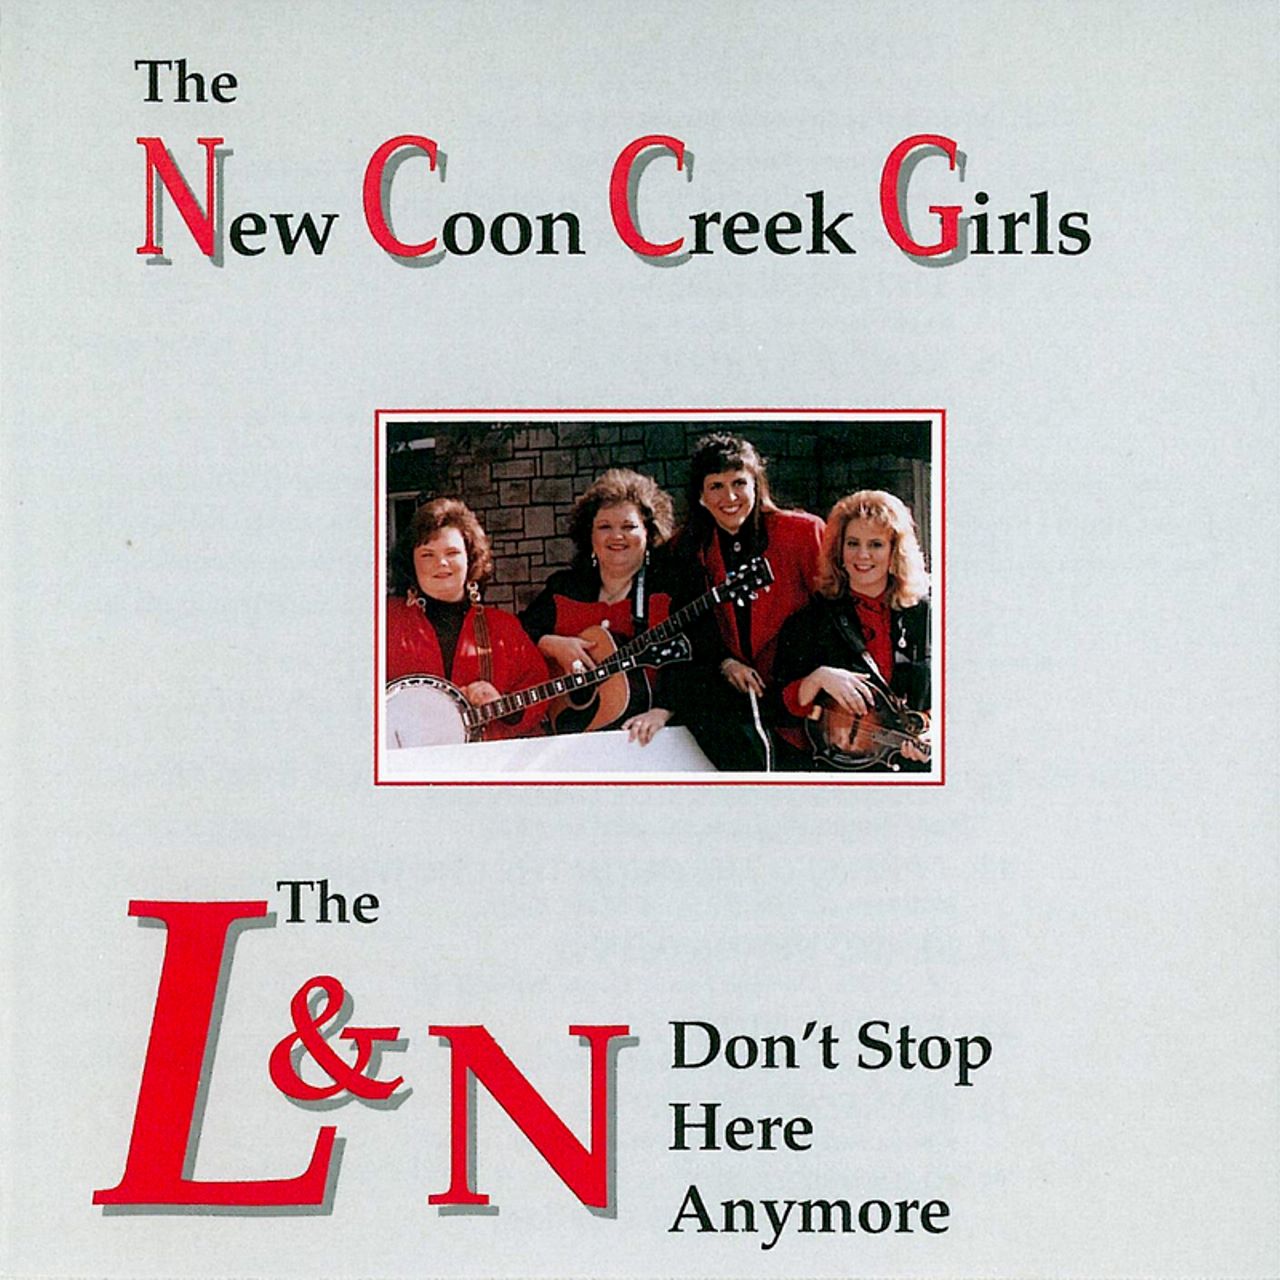 New Coon Creek Girls - The L&N Don't Stop Here Anymore cover album